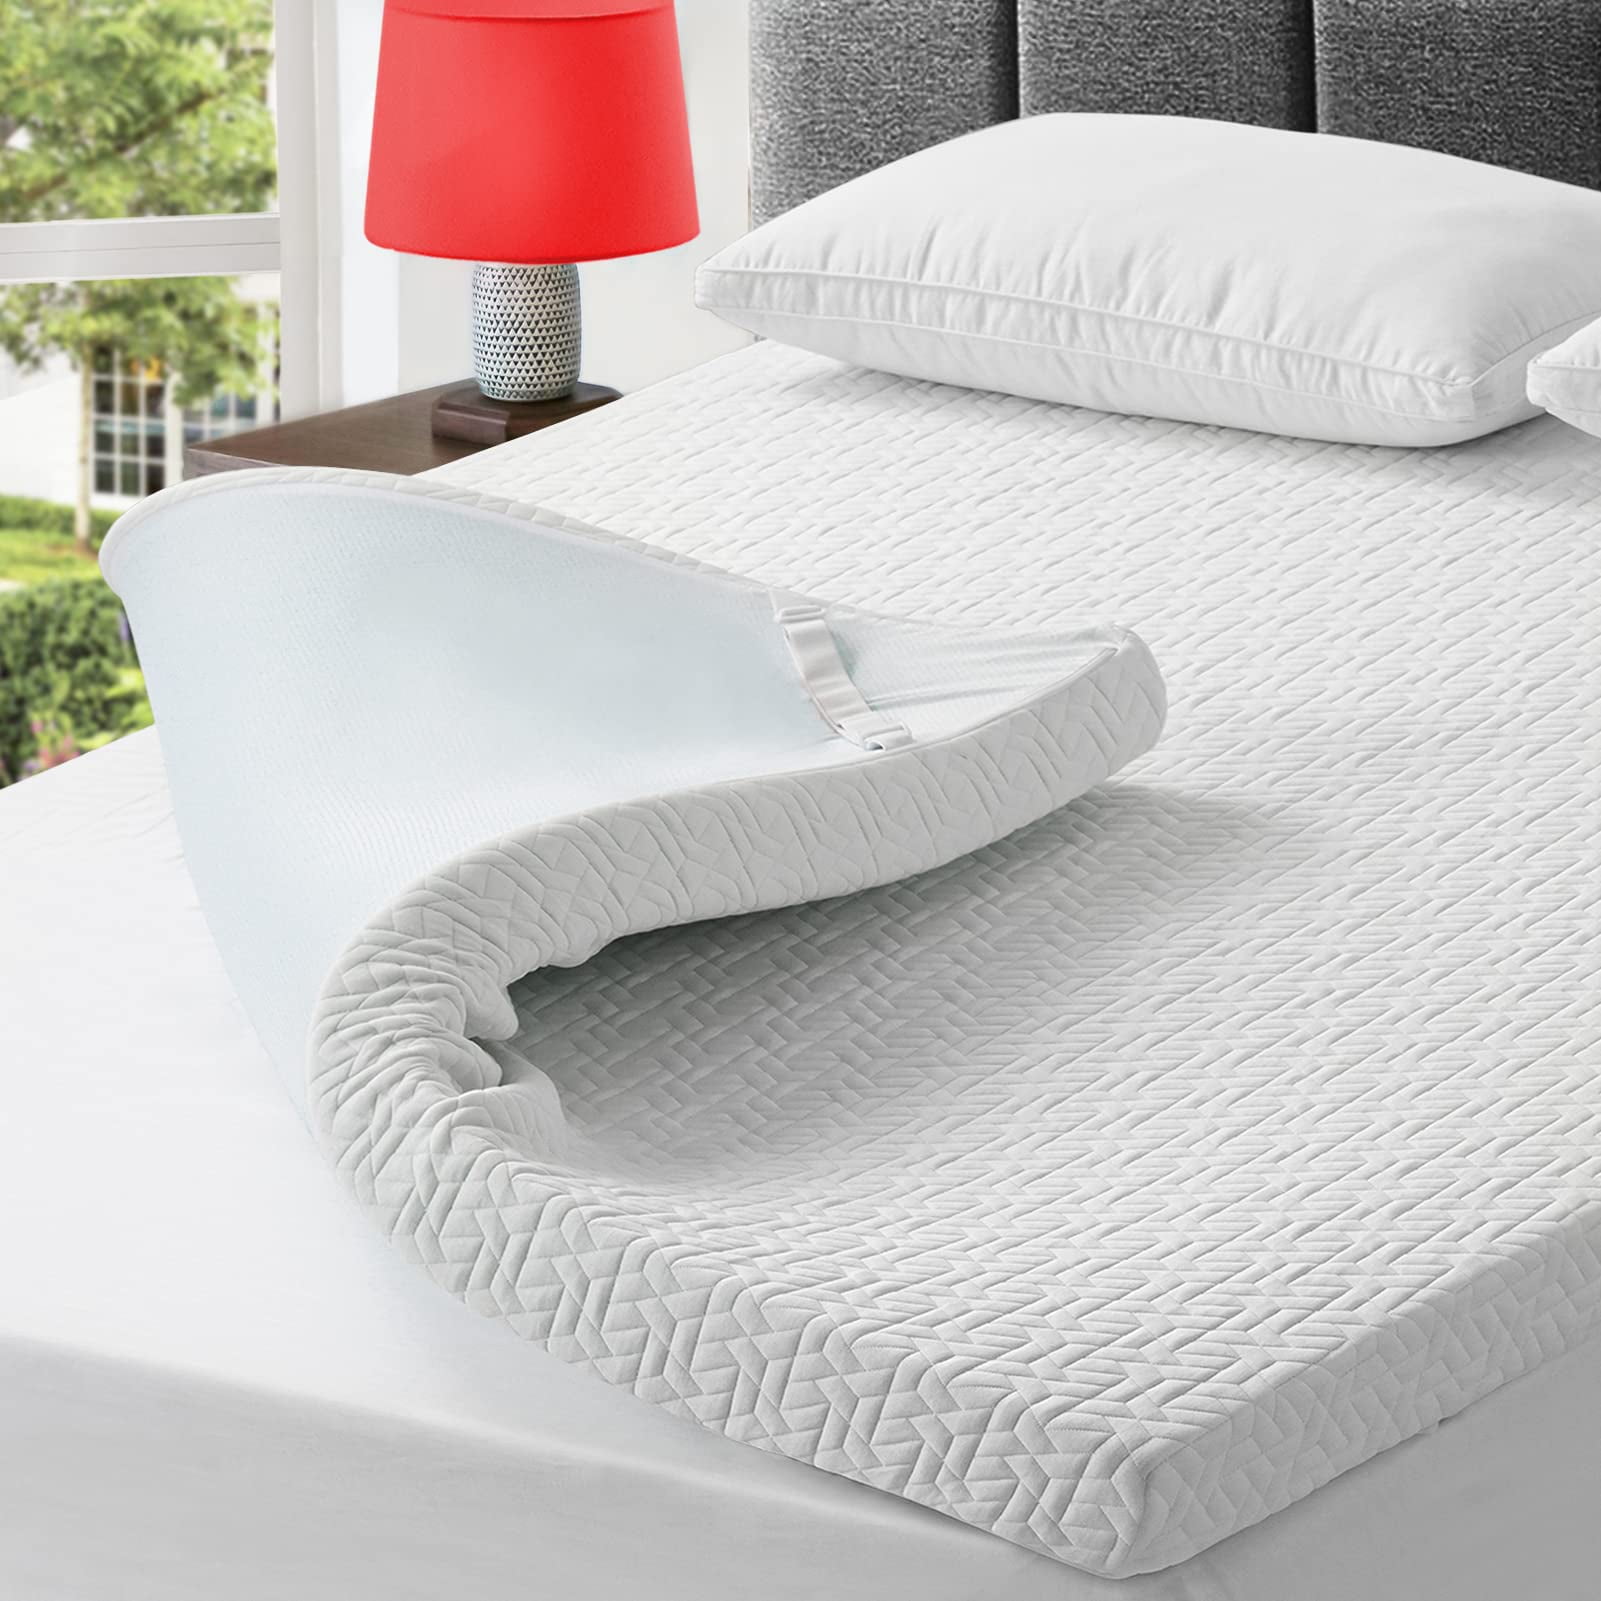 BedLuxury 3 Inch Gel Twin XL Size Topper Gel Memory Foam , High Density Soft Foam Mattress Pad Cover for Back Pain, Bed Topper with Removable Breathable Bamboo Walmart.com